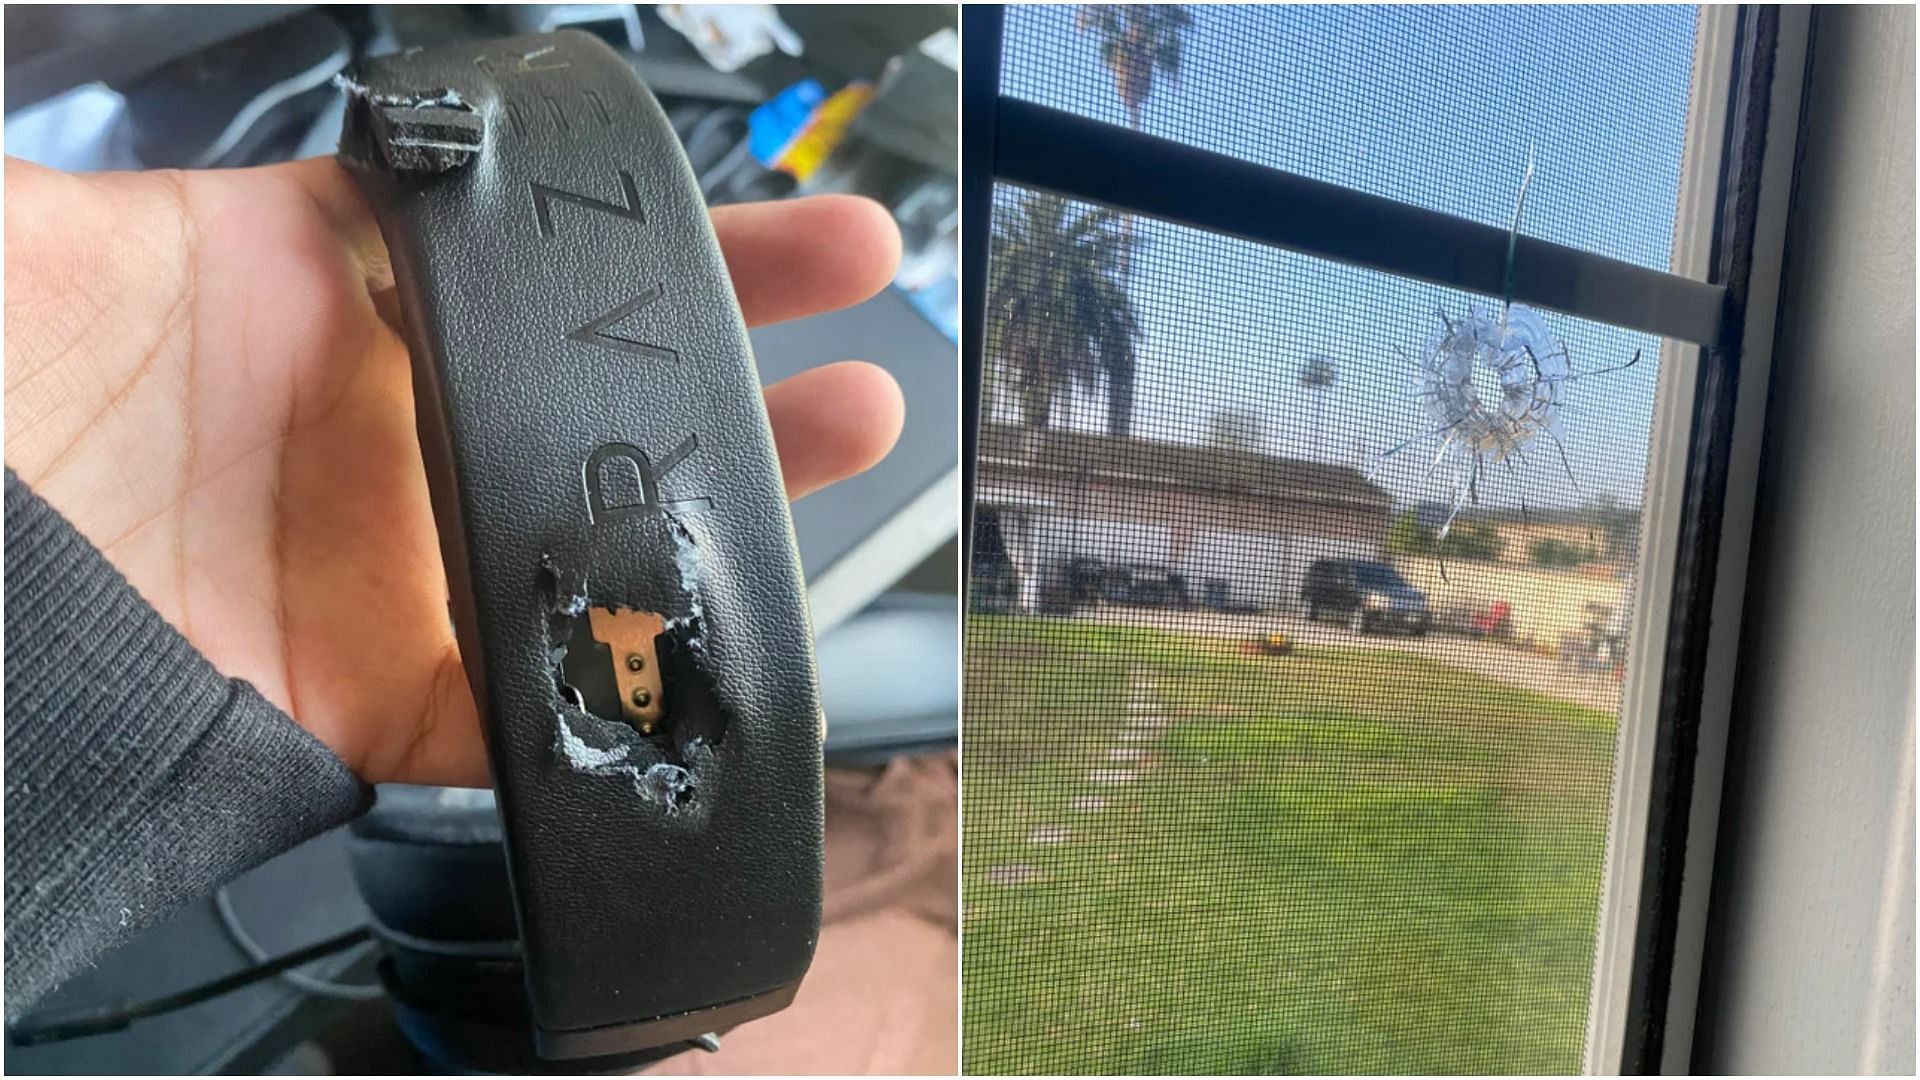 Reddit user claims his headset saved his life from a bullet (Images via Reddit u/Enough_Dance_956)